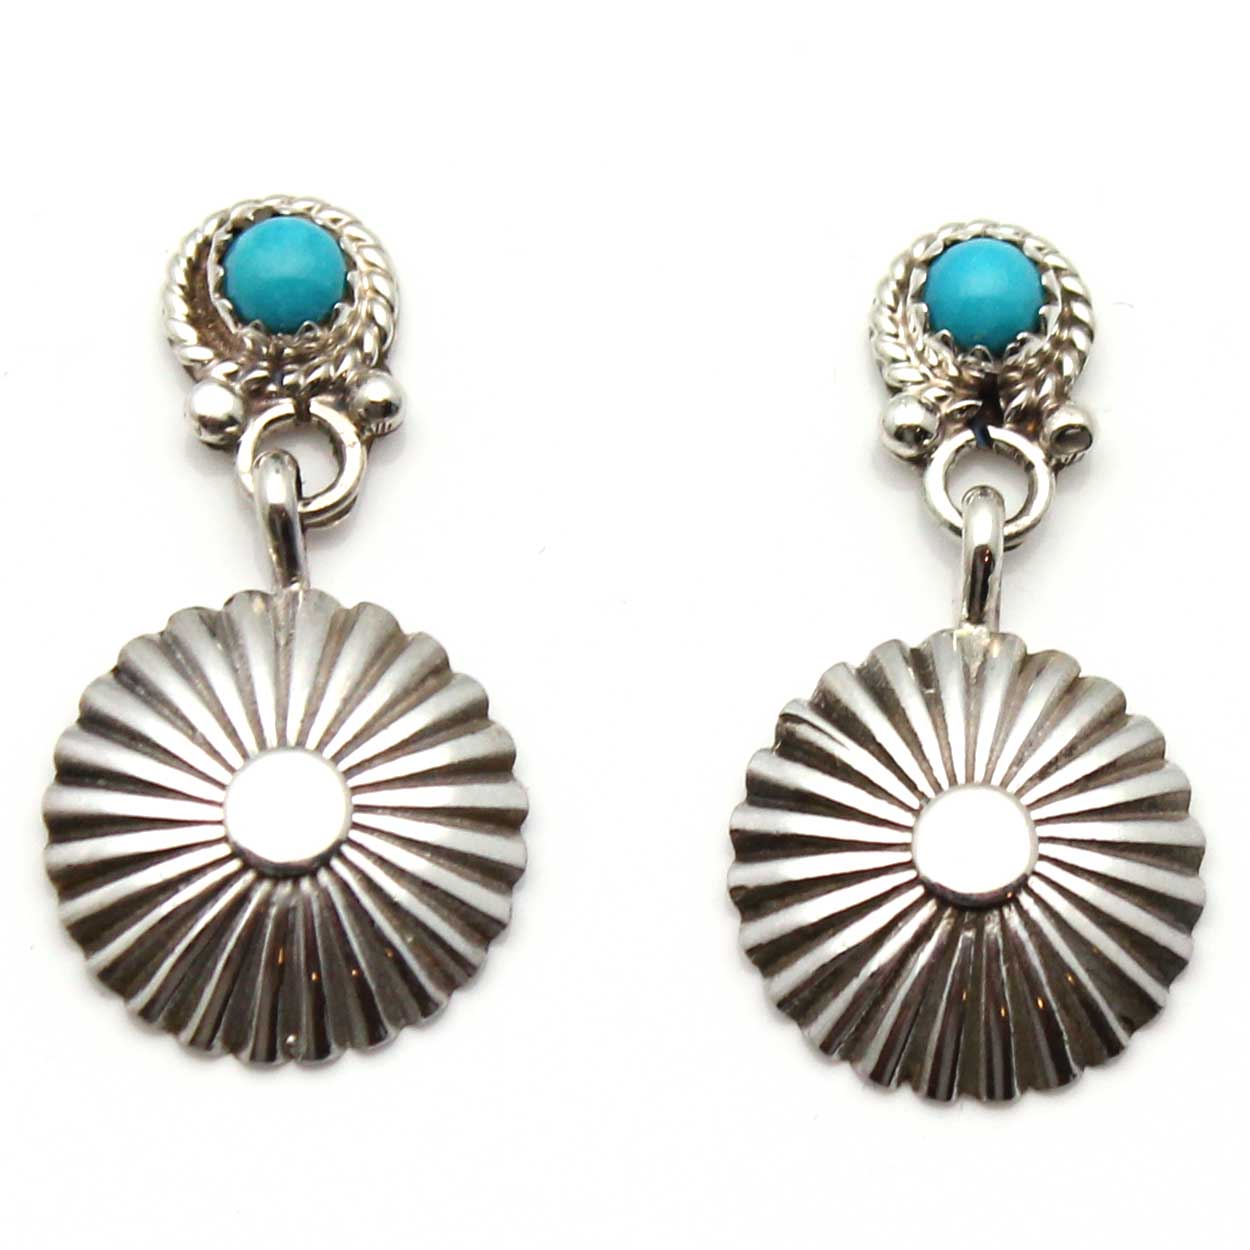 Silver & Turquoise Post Earrings